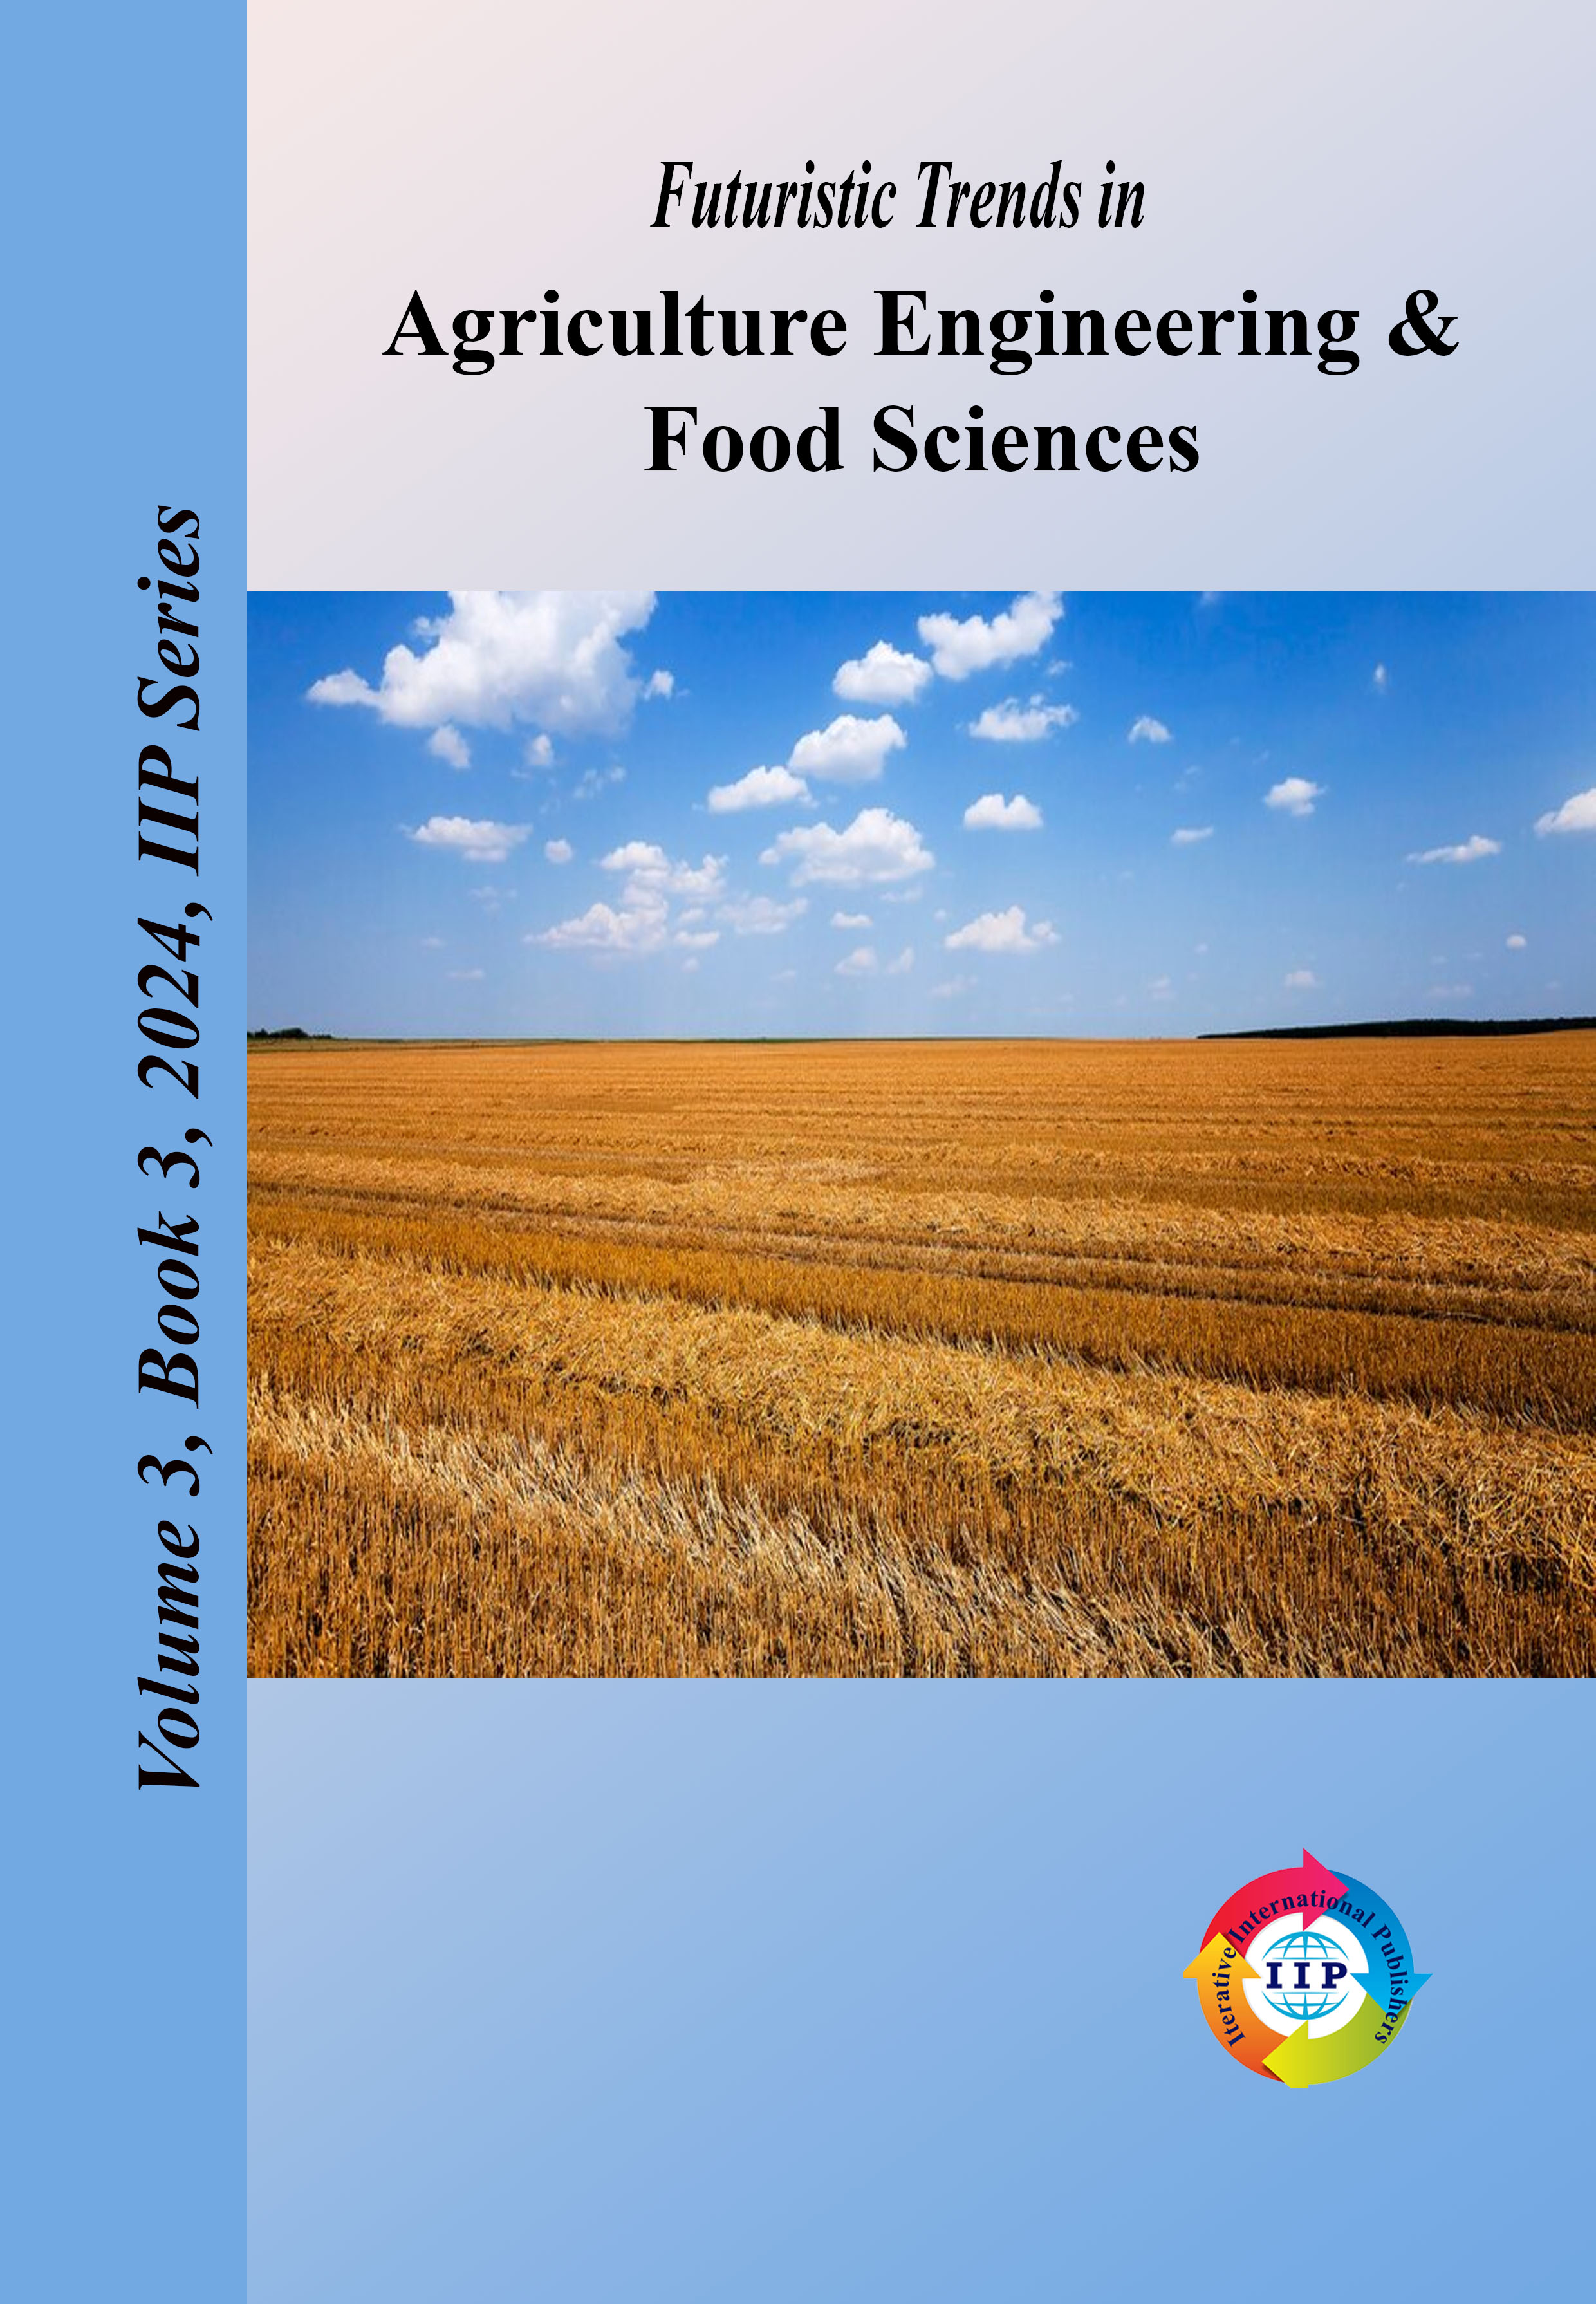 Futuristic Trends in Agriculture Engineering & Food Sciences Volume 3 Book 3